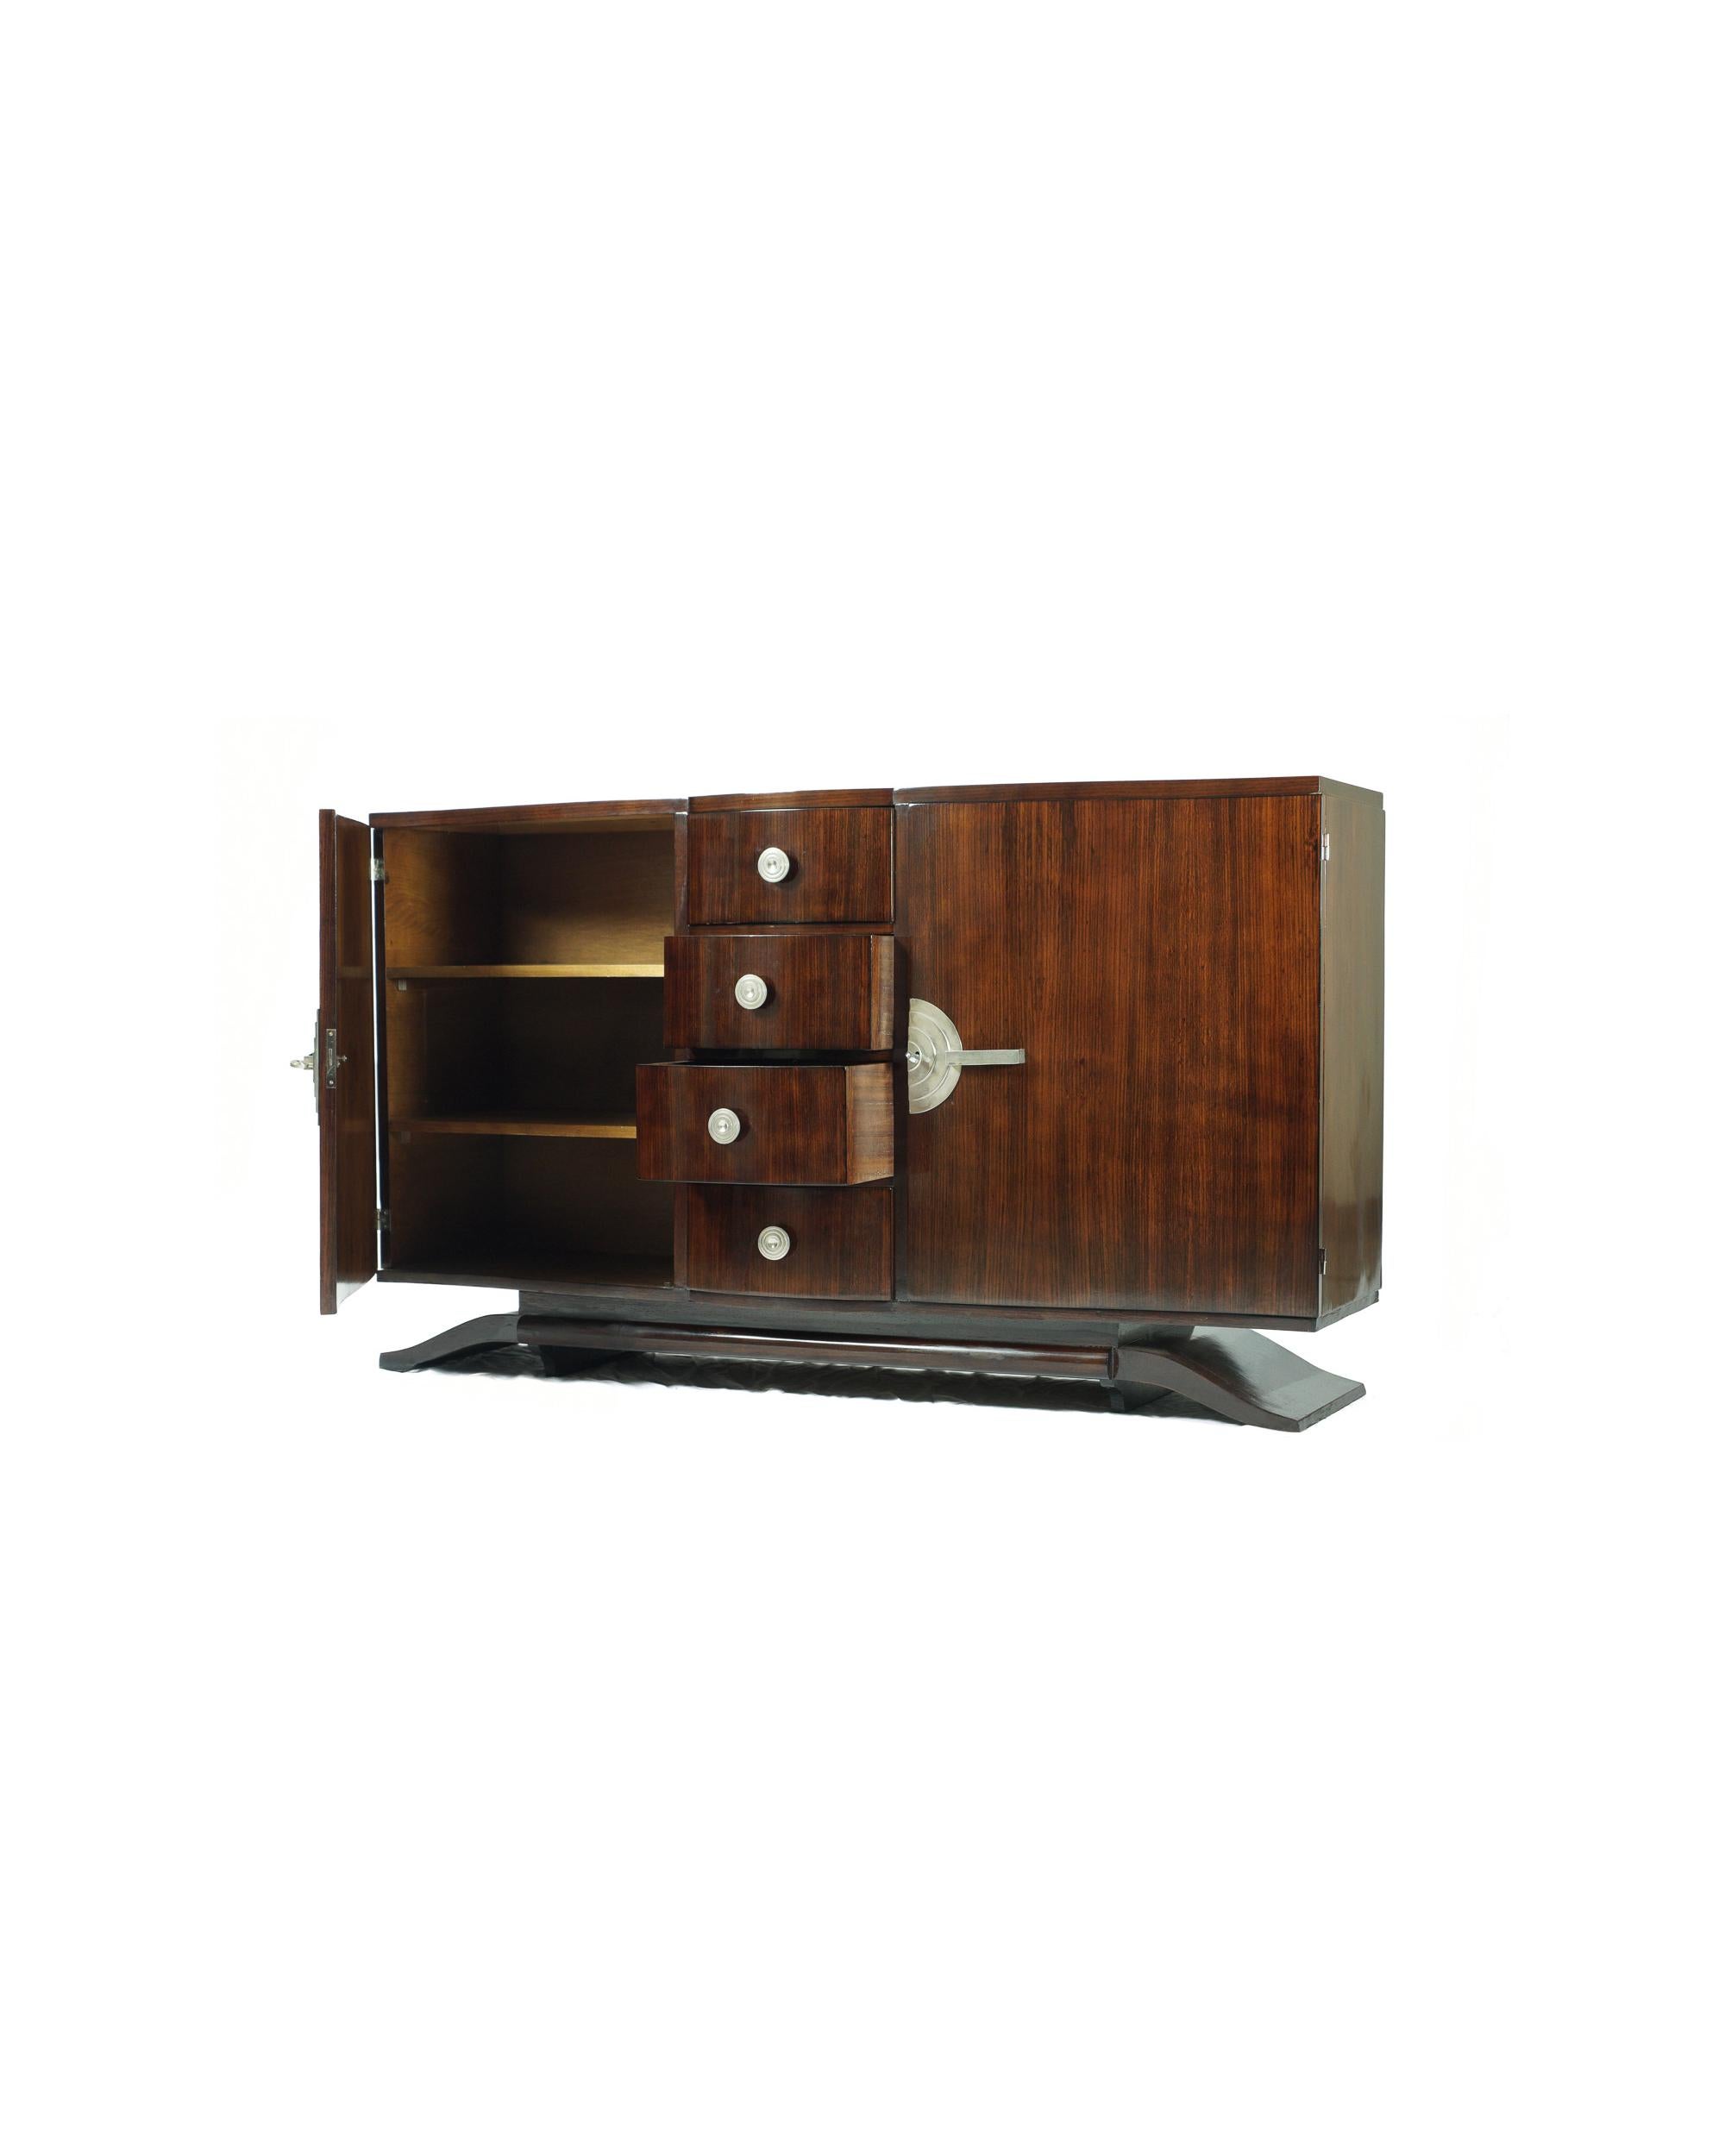 A mid century rosewood veneer sideboard / console with two doors and four central drawers, chromed original handles in good conditions with interior sections and a lacquered base.
